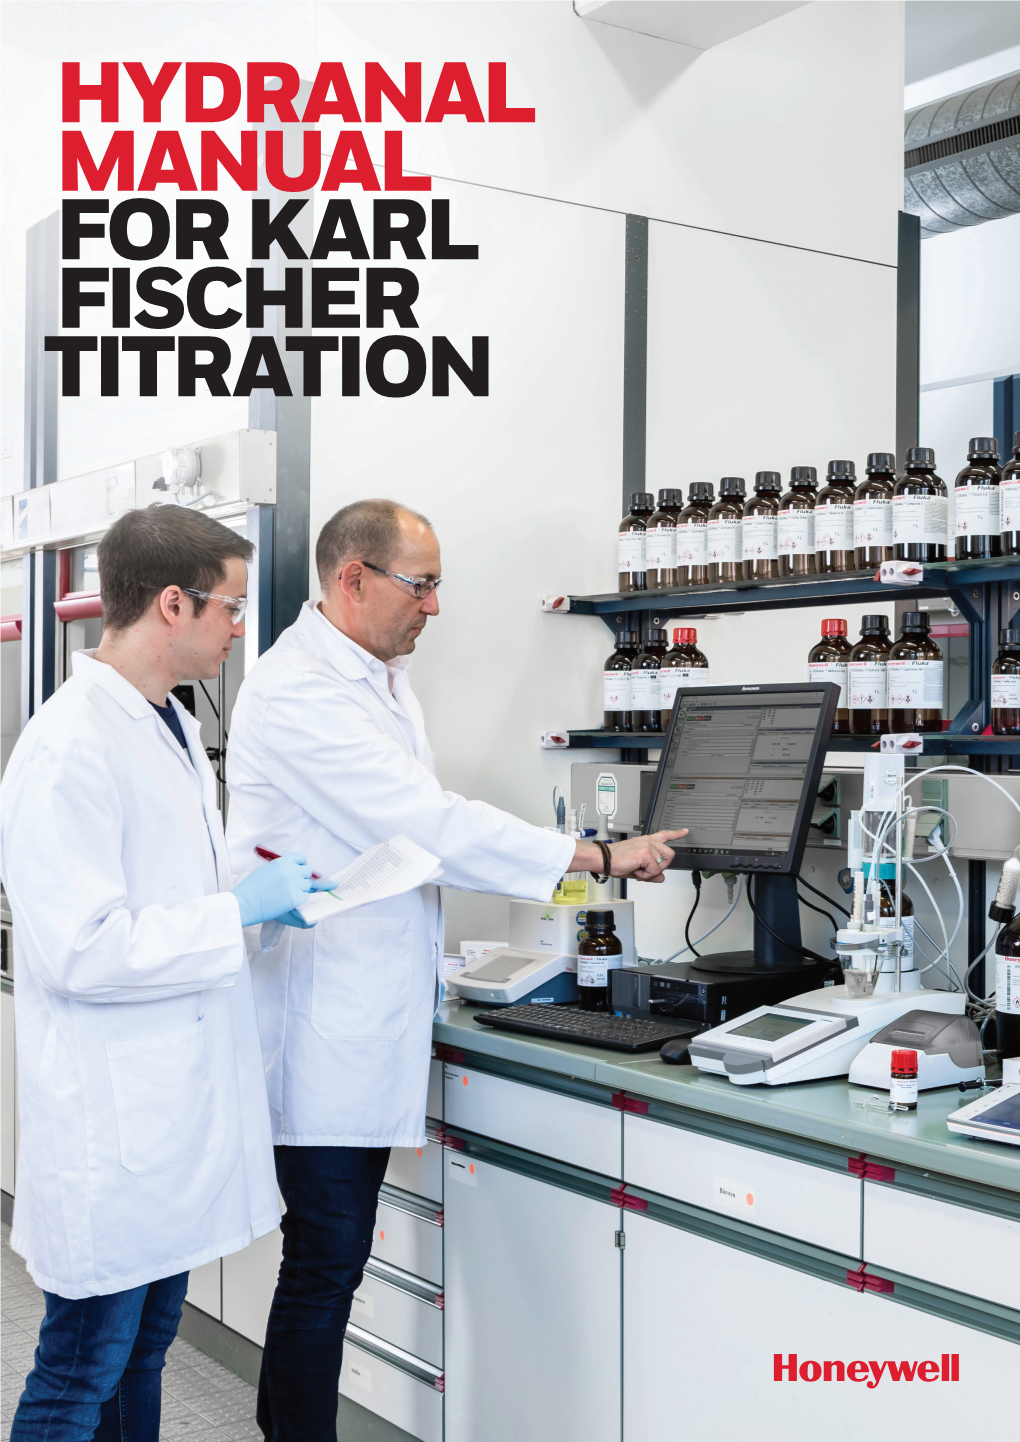 HYDRANAL MANUAL for KARL FISCHER TITRATION HYDRANAL™ Manual